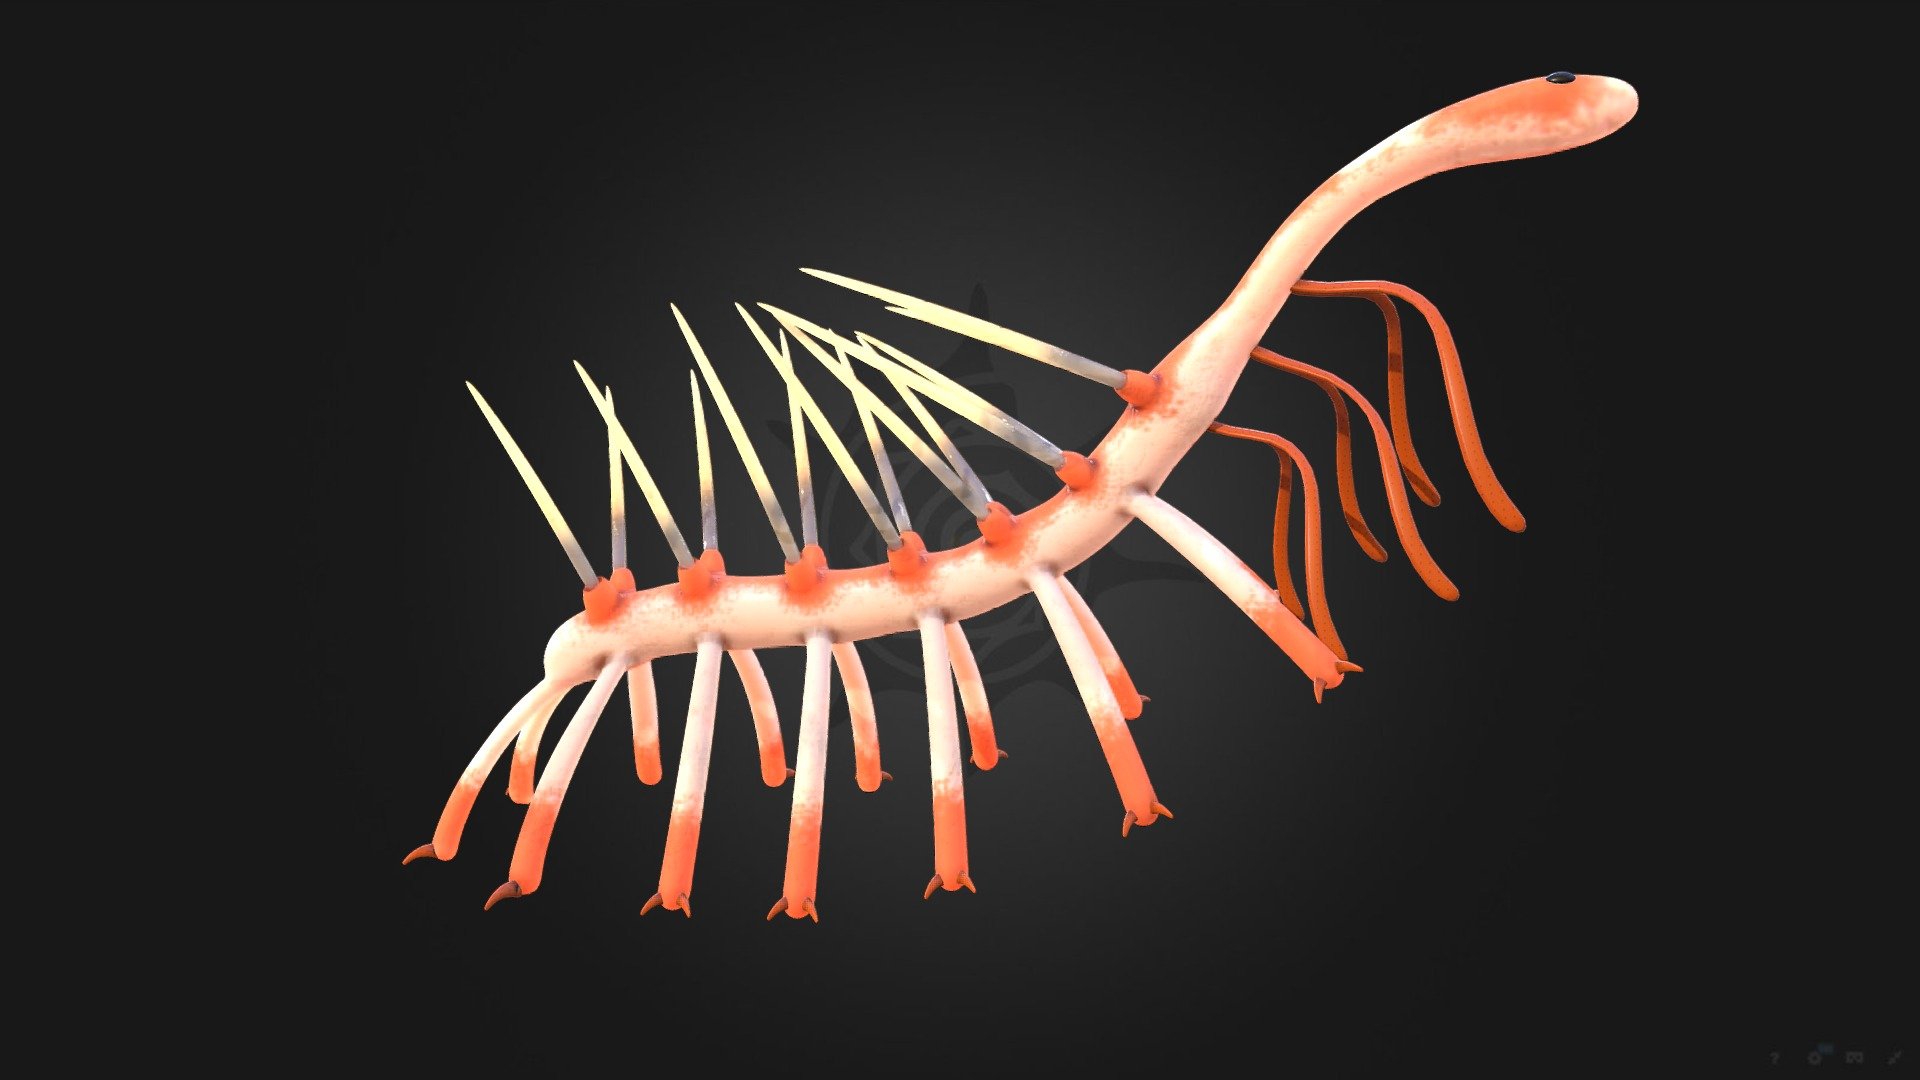 Hallucigenia is a genus of Cambrian xenusiids known from articulated fossils in Burgess Shale-type deposits in Canada and China, and from isolated spines around the world. Its quirky name reflects its unusual appearance and eccentric history of study; when it was erected as a genus, the animal was reconstructed upside down and back to front. Hallucigenia is now recognized as a &ldquo;lobopodian worm